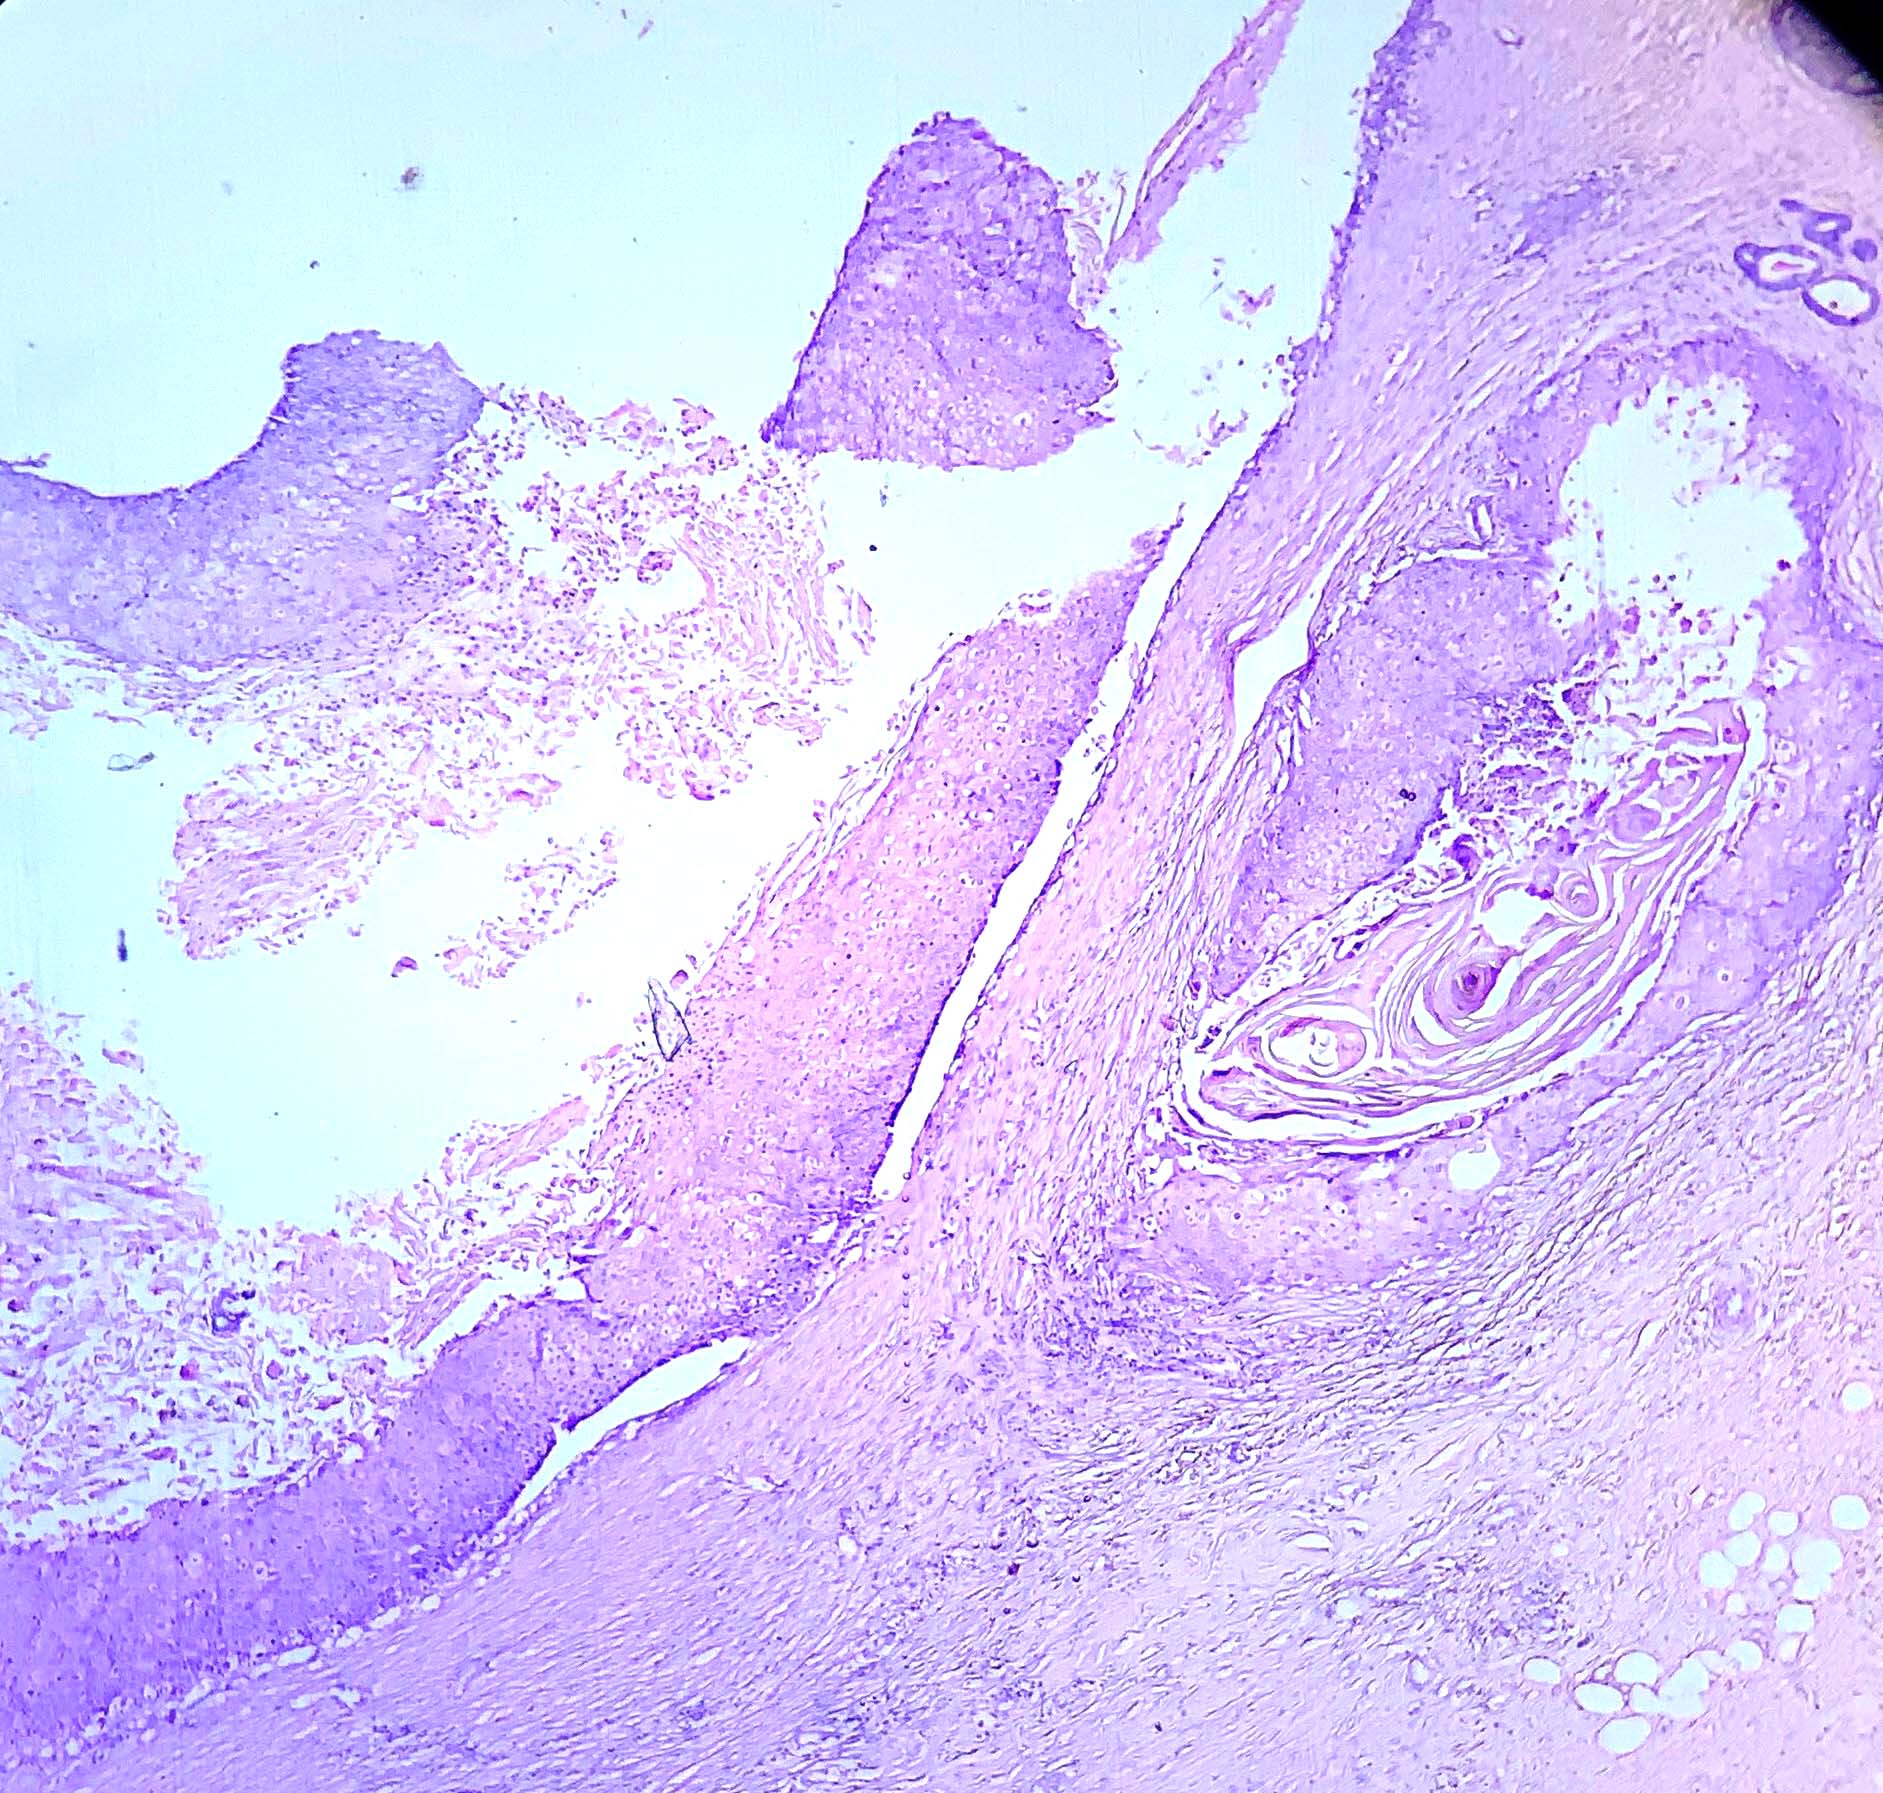 Cystic lesion with infiltration